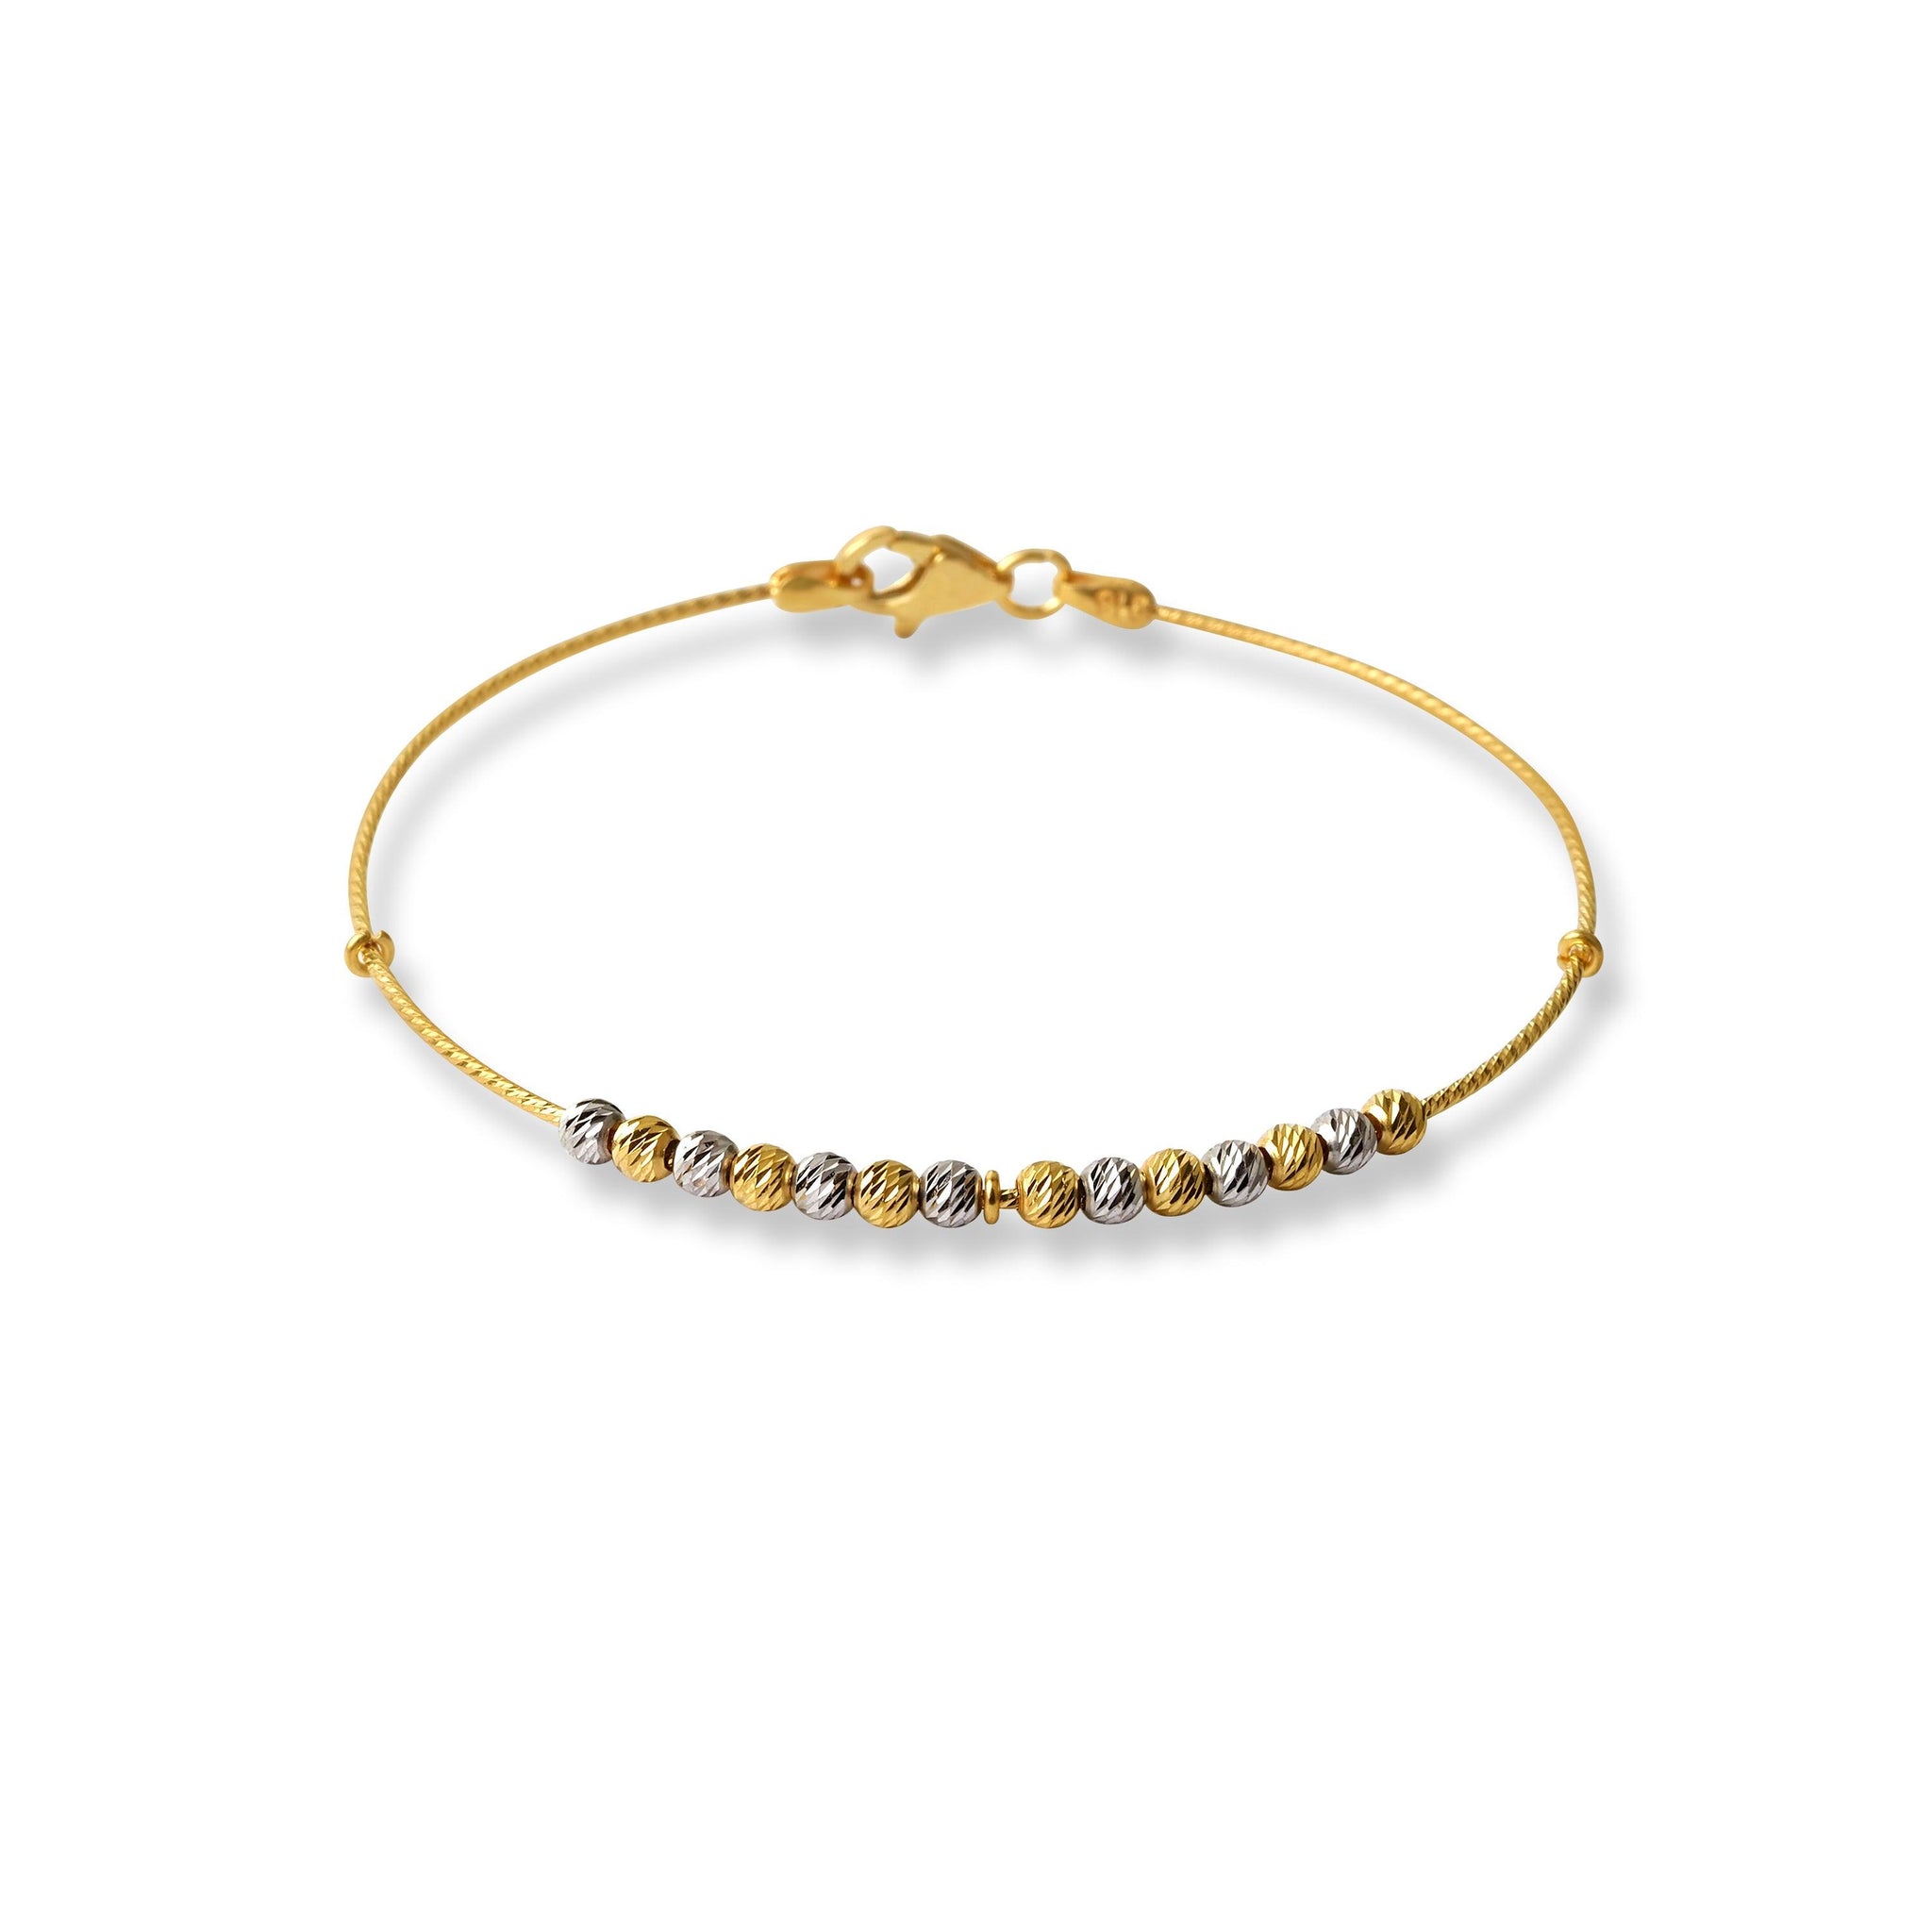 22ct Gold Rhodium Plated Beads Bangle With Rounded Trigger Clasp (4.0g) B-8516